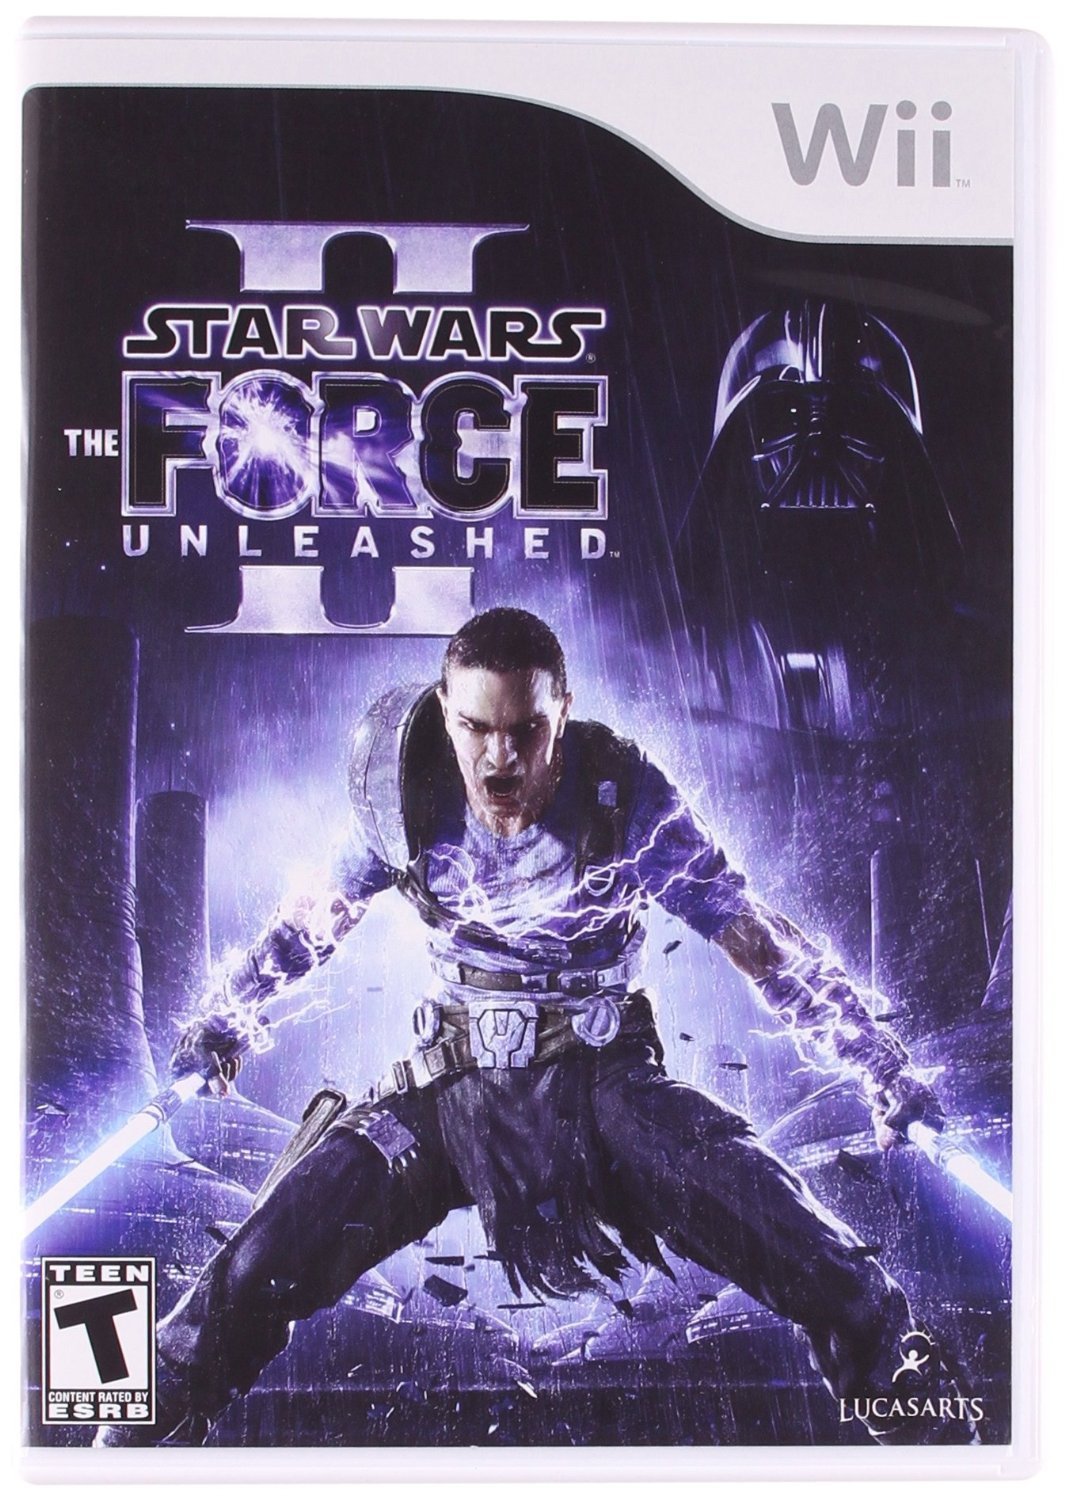 Star Wars: The Force Unleashed II - Darkside Records